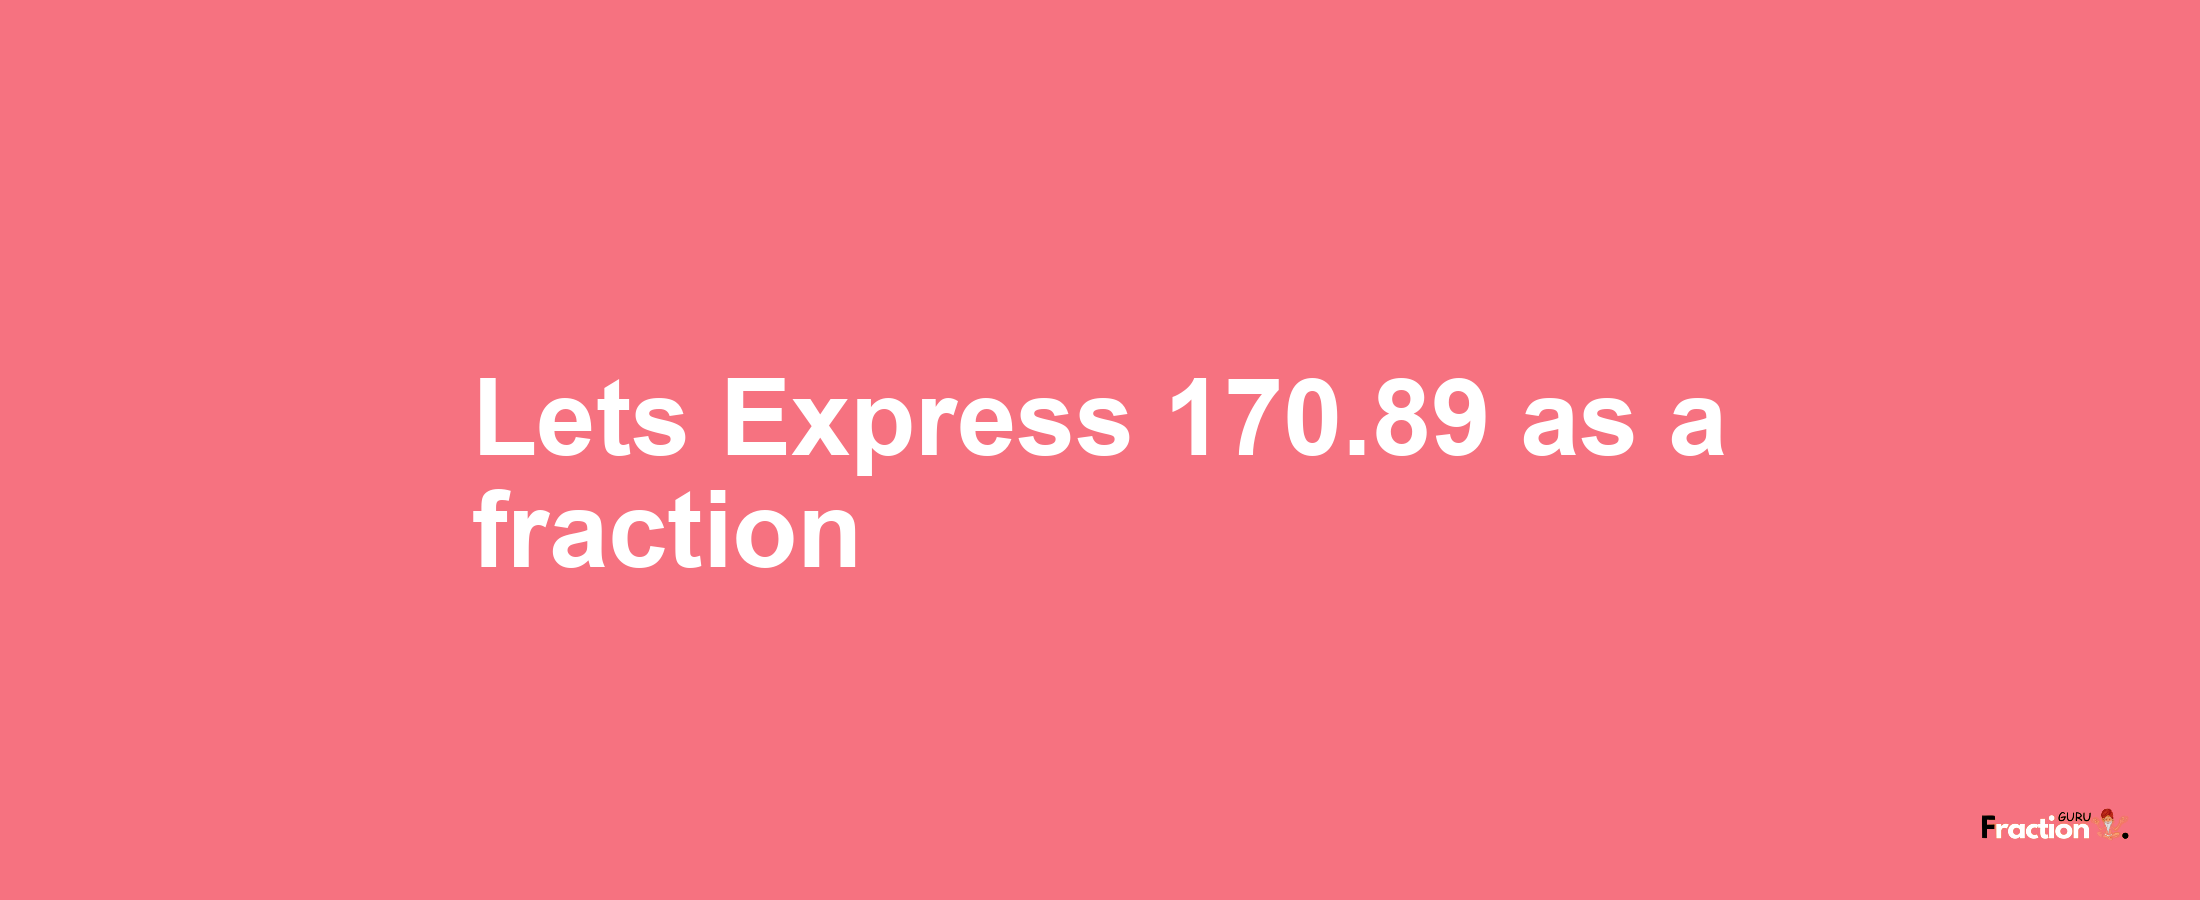 Lets Express 170.89 as afraction